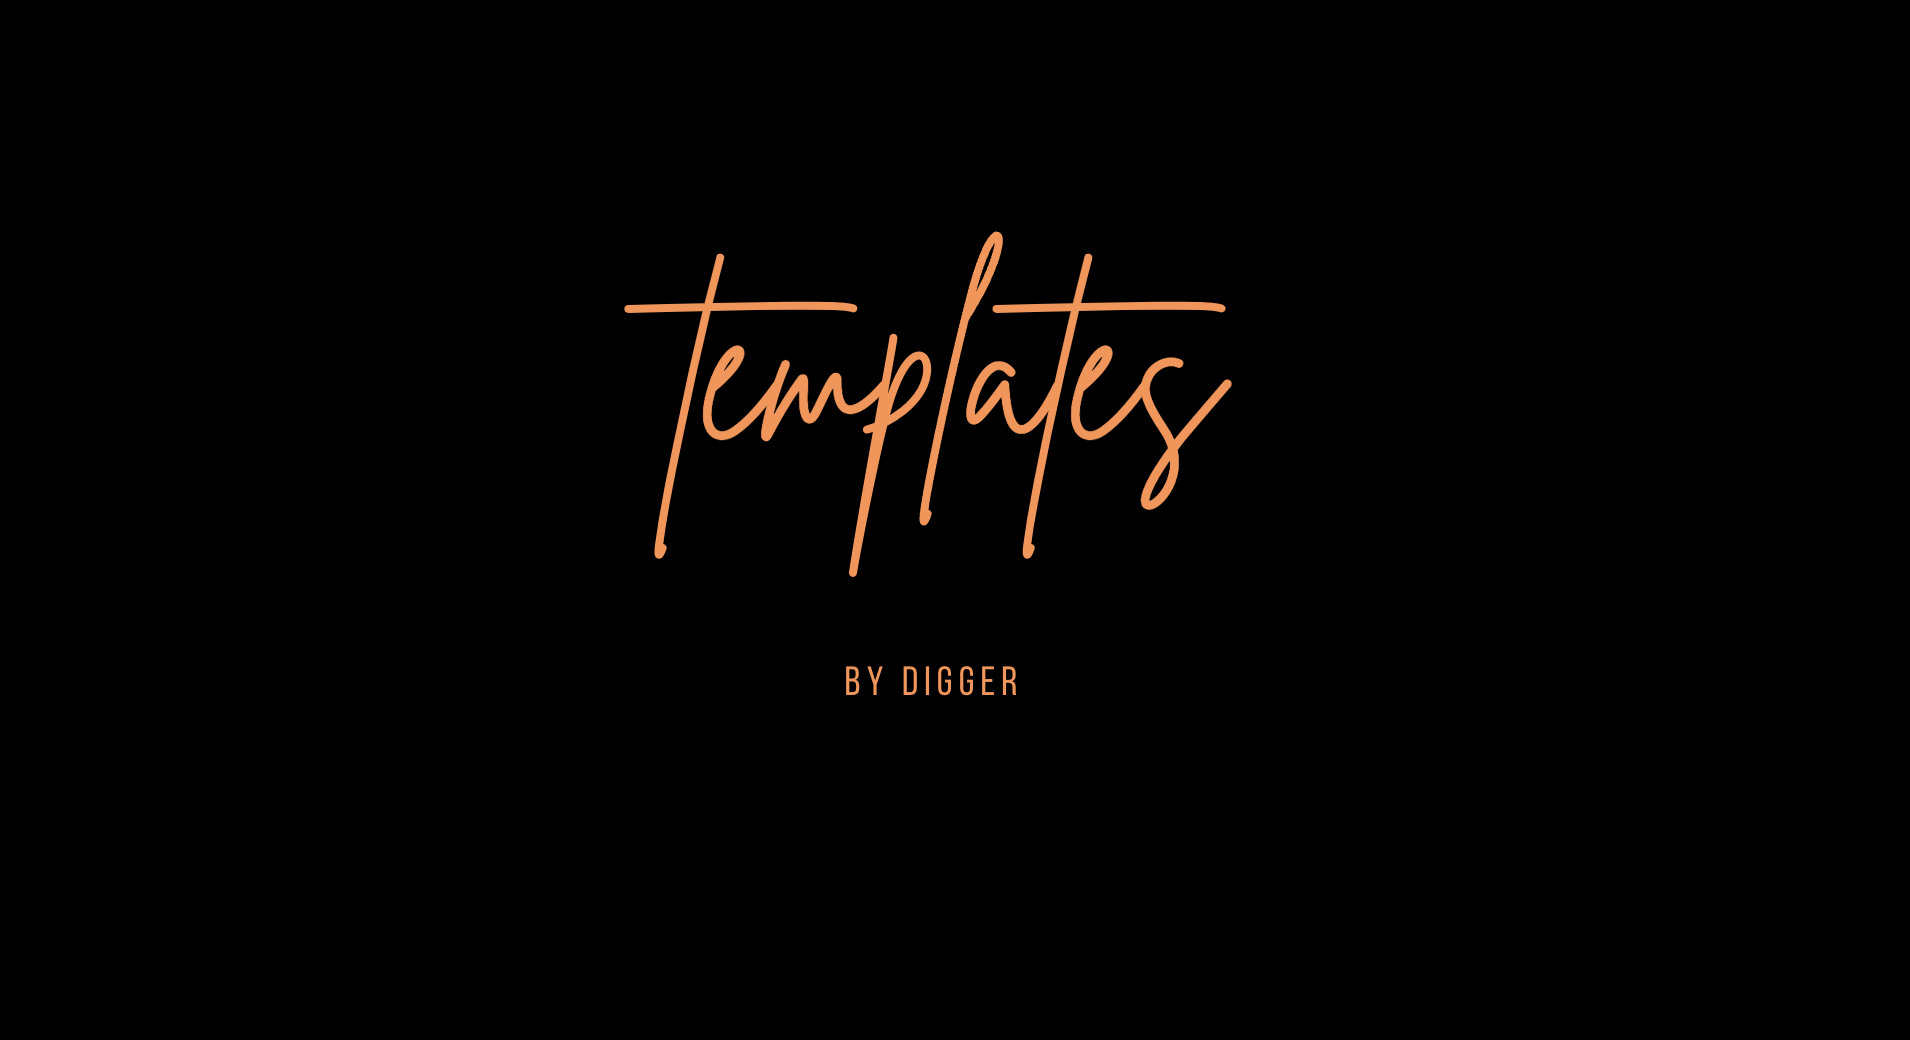 Templates by Digger